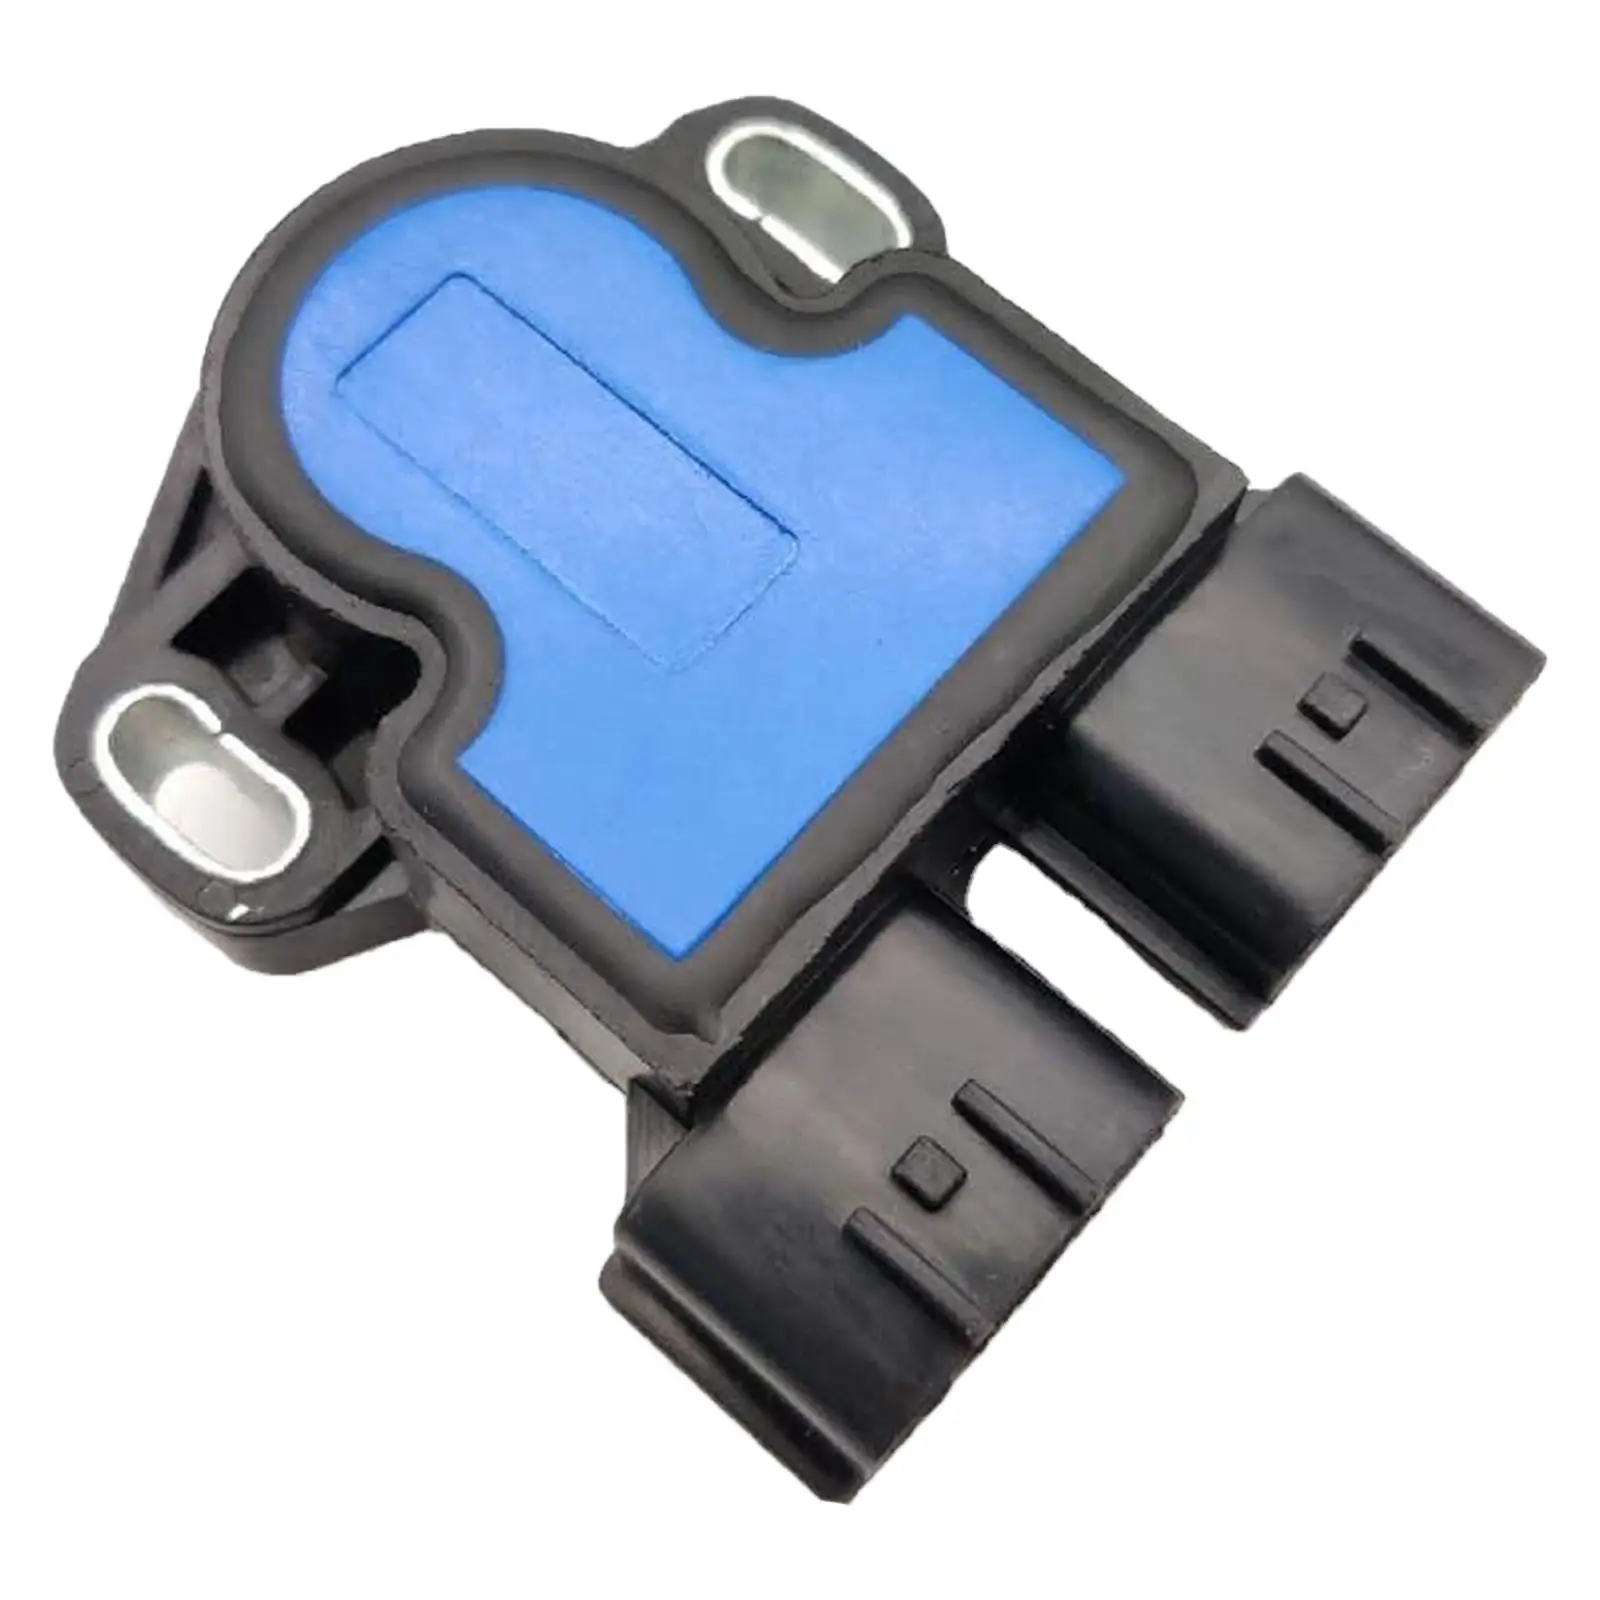 Throttle Position Sensor Fits for Nian Pathfinde SERA486-07 8971631640 SERA486-08 Replacement Part Acceories